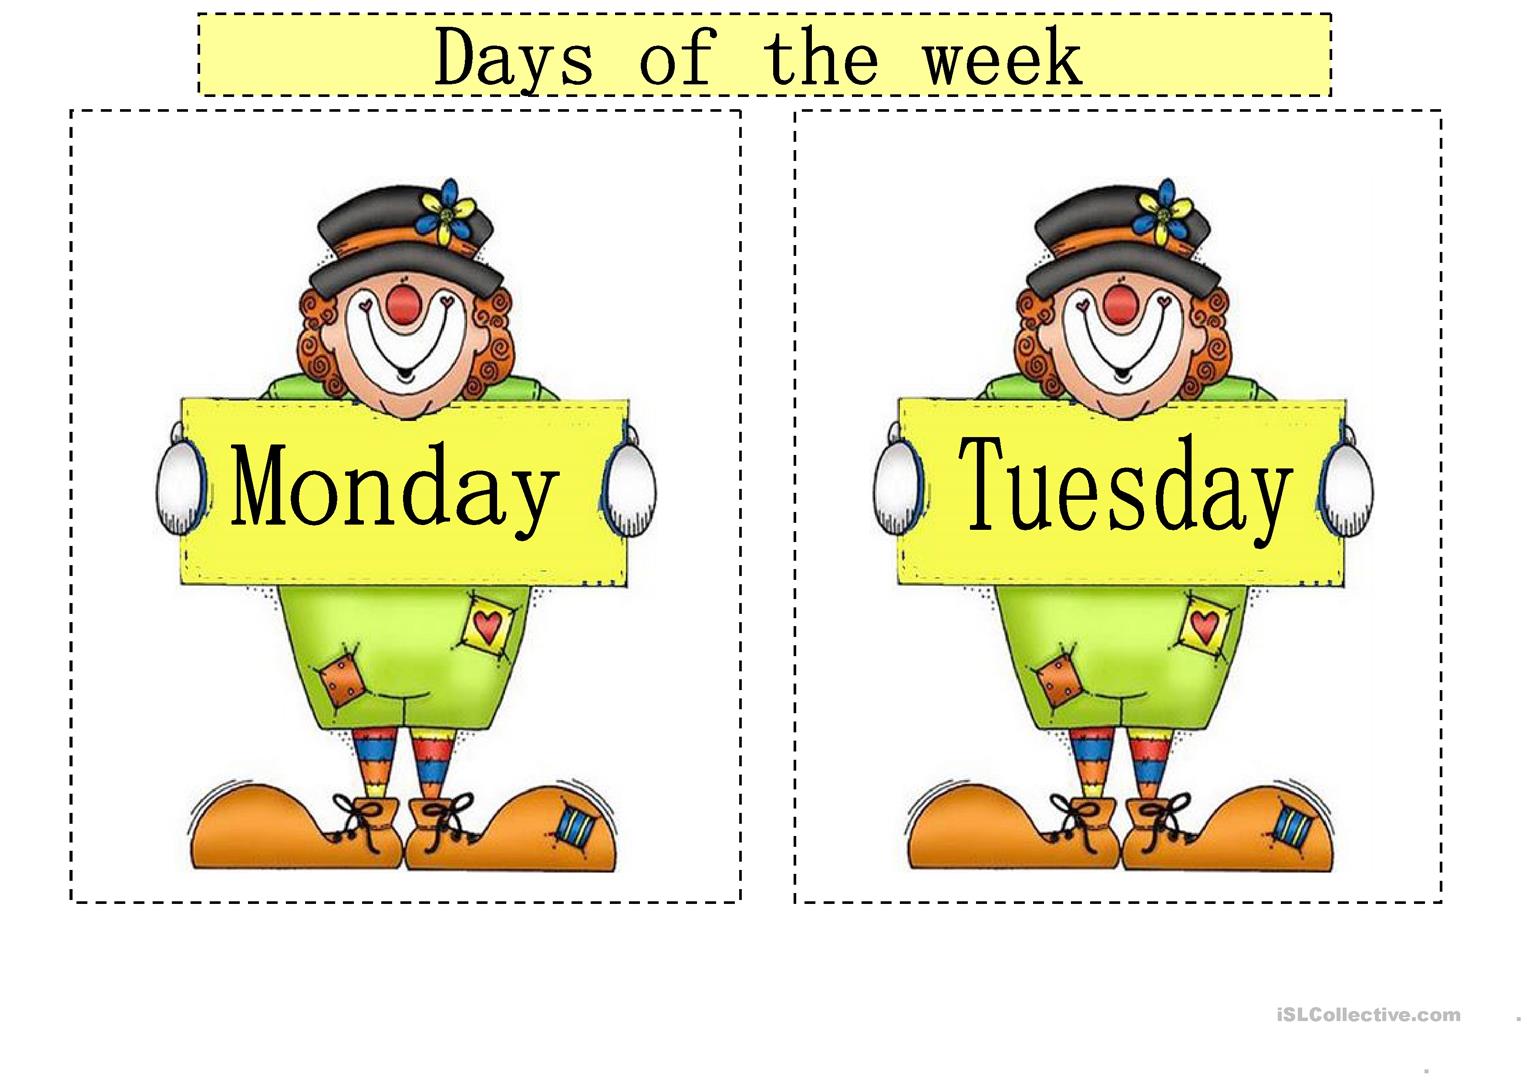 Picture of the week. Days of the week ISLCOLLECTIVE. Monday week. Days of the week ISLCOLLECTIVE com.